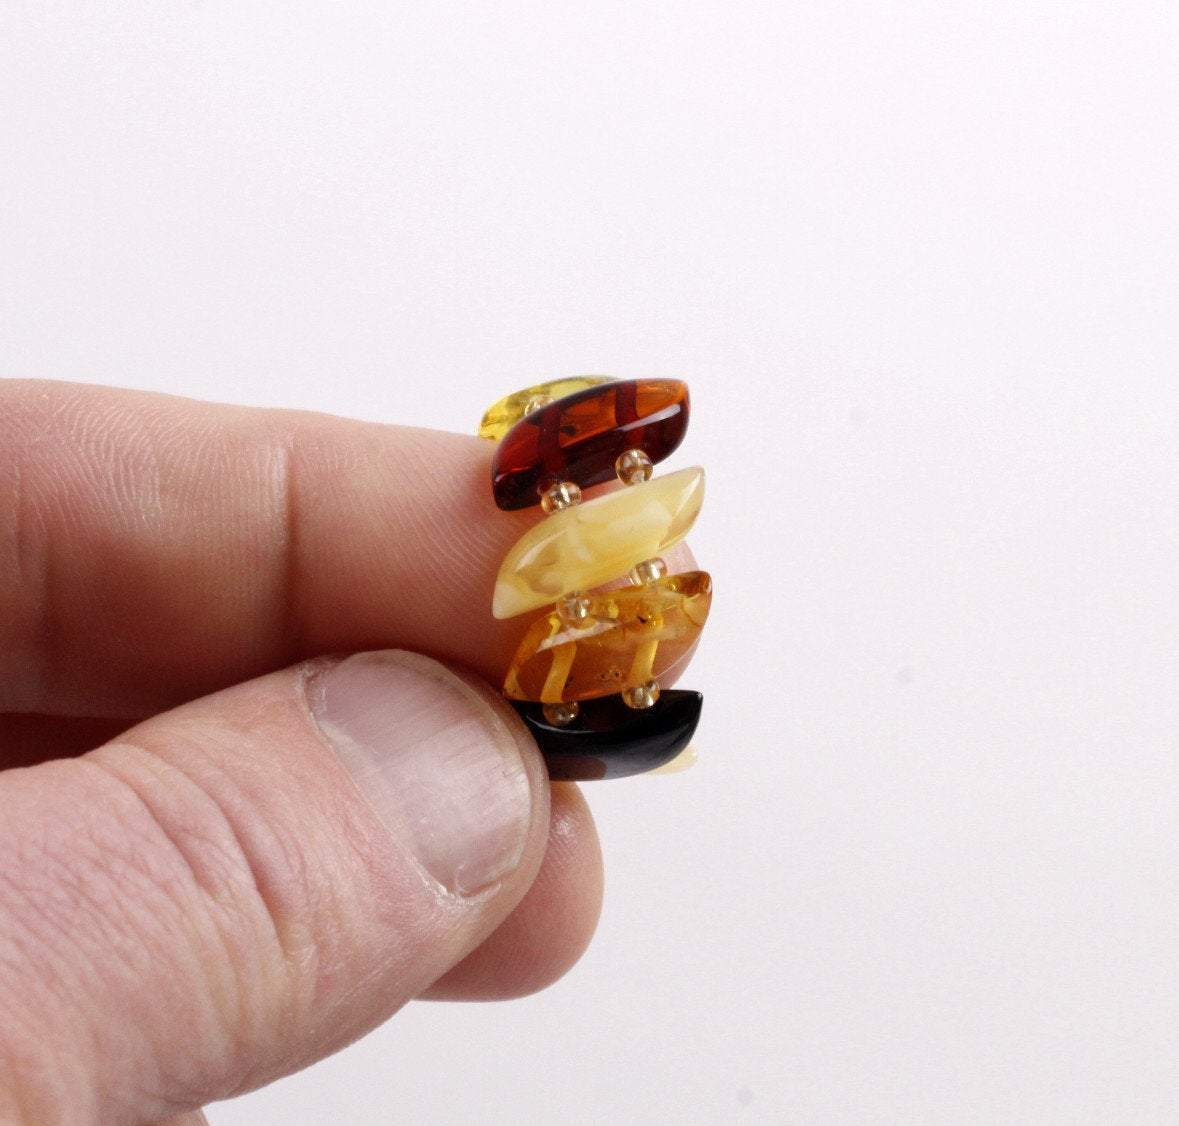 Elastic Ring, Baltic Amber Ring, Natural Amber Ring, Gemstone Ring, Expandable,Stretch Flexible Ring, Thumb Ring, Ring for Pain Relief - Amber SOS